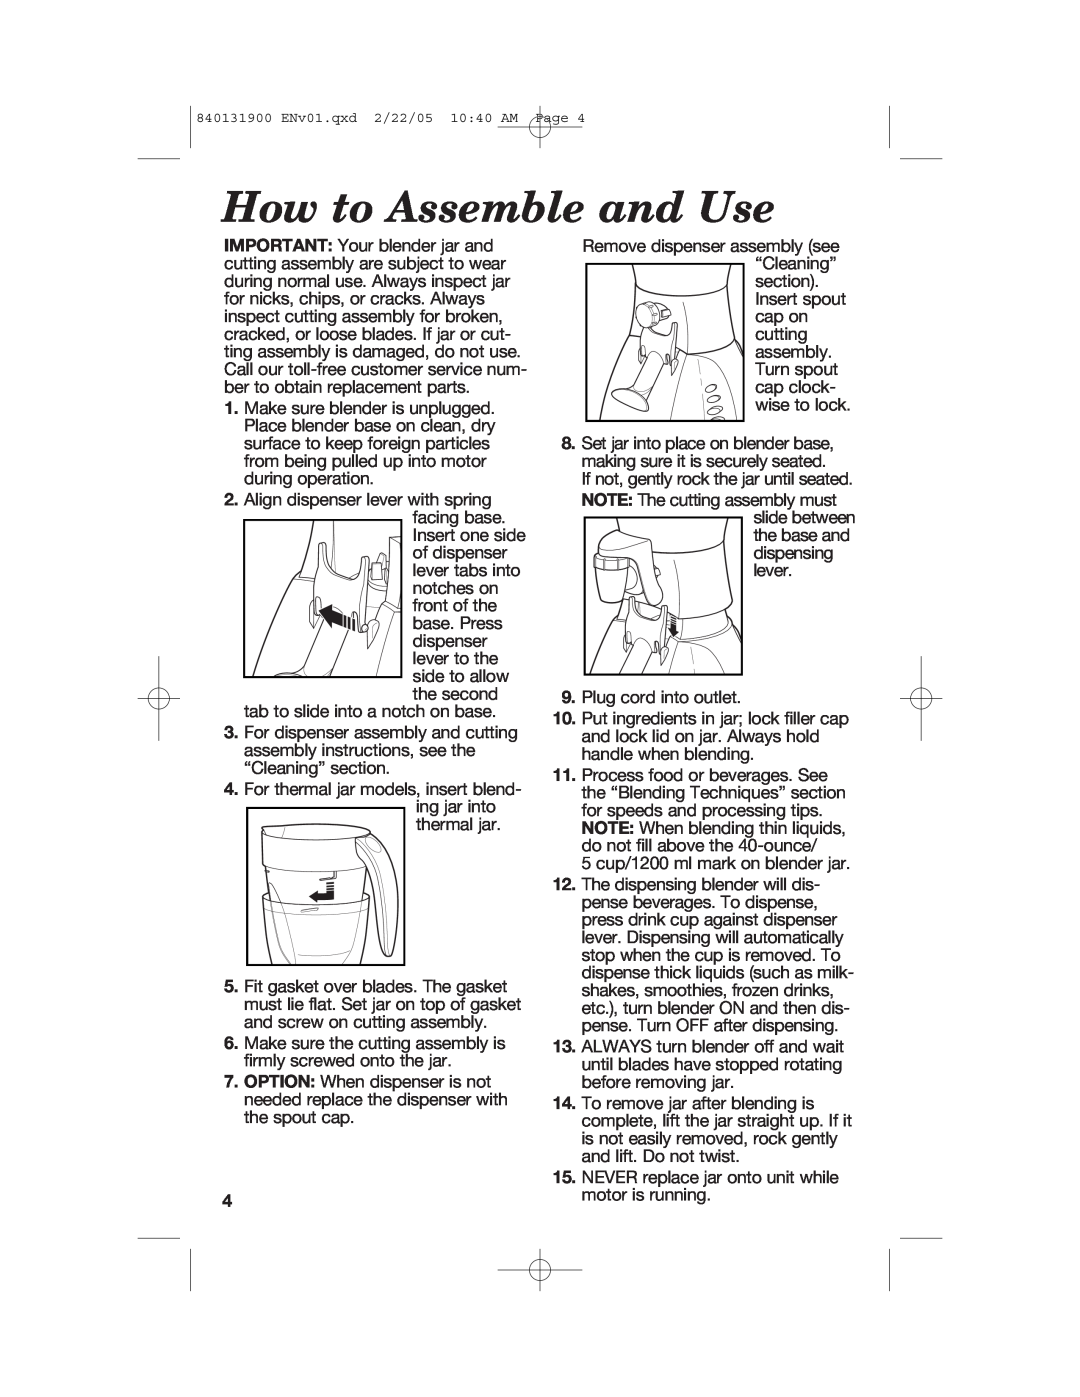 Hamilton Beach 50754C manual How to Assemble and Use 